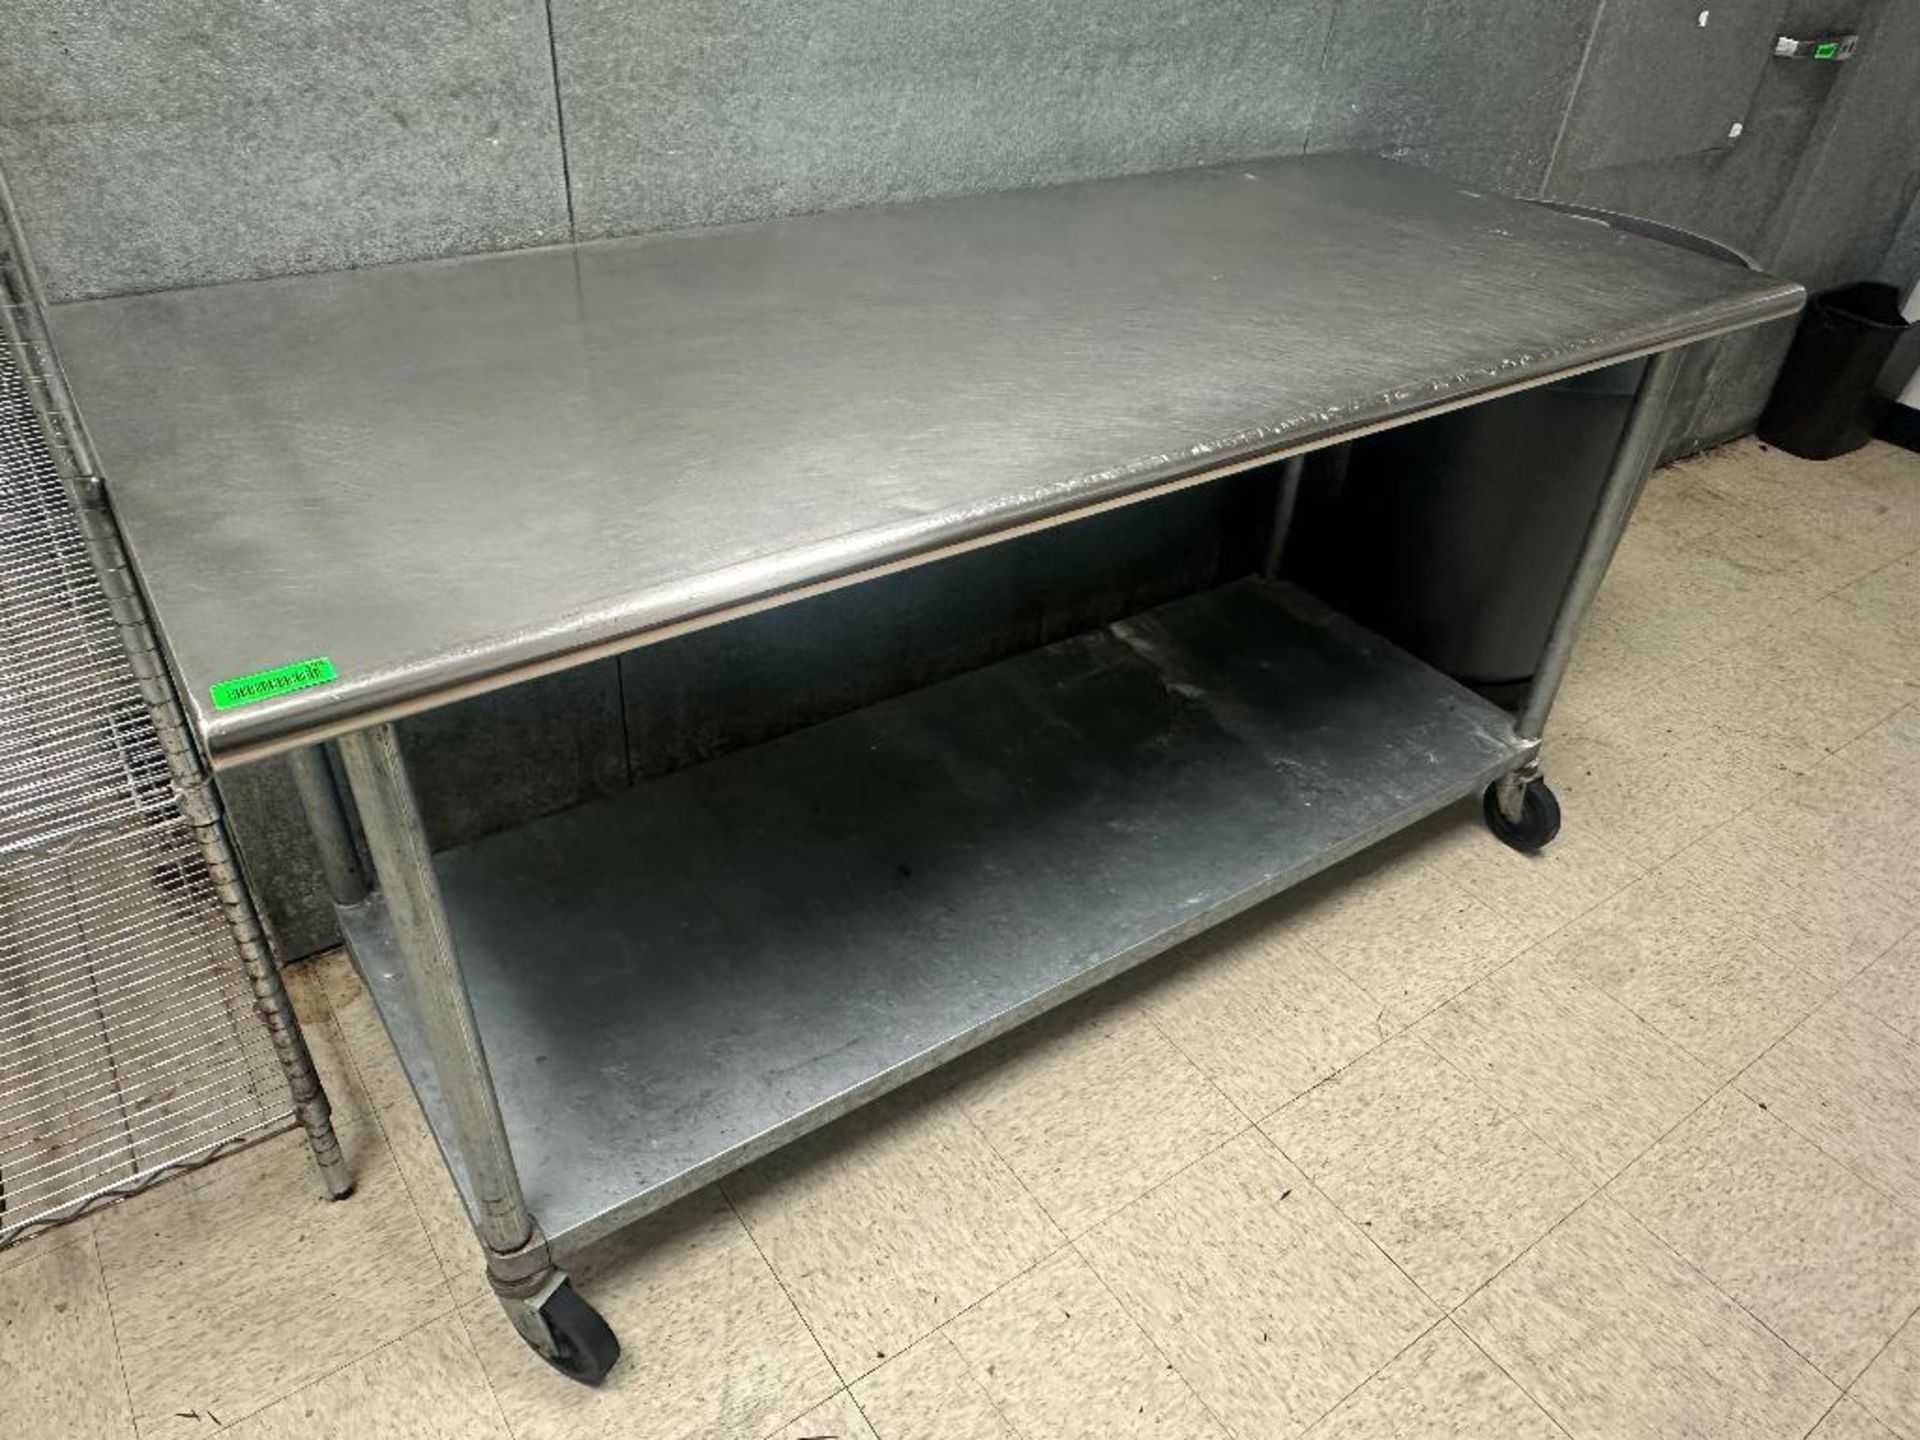 DESCRIPTION 72" X 30" STAINLESS TABLE W/ GALVANIZED UNDER SHELF. ADDITIONAL INFORMATION ON CASTERS S